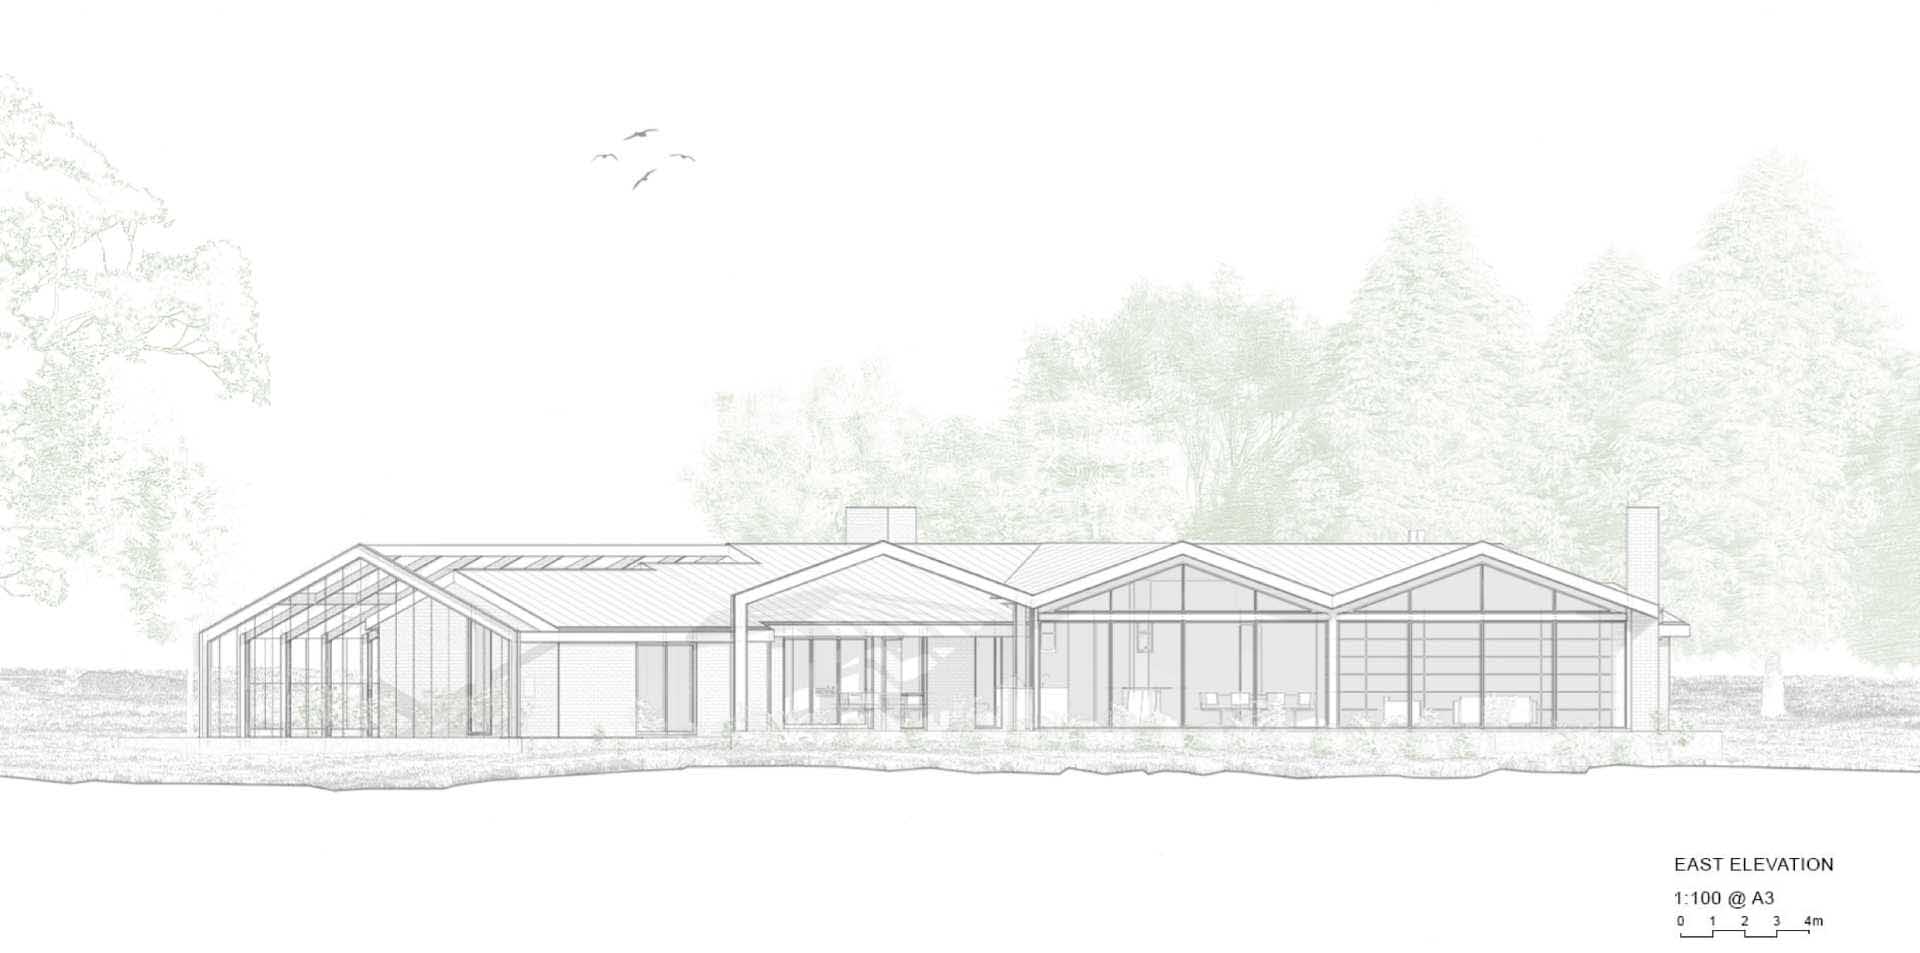 The east elevation diagram of a remodeled modern farm house.